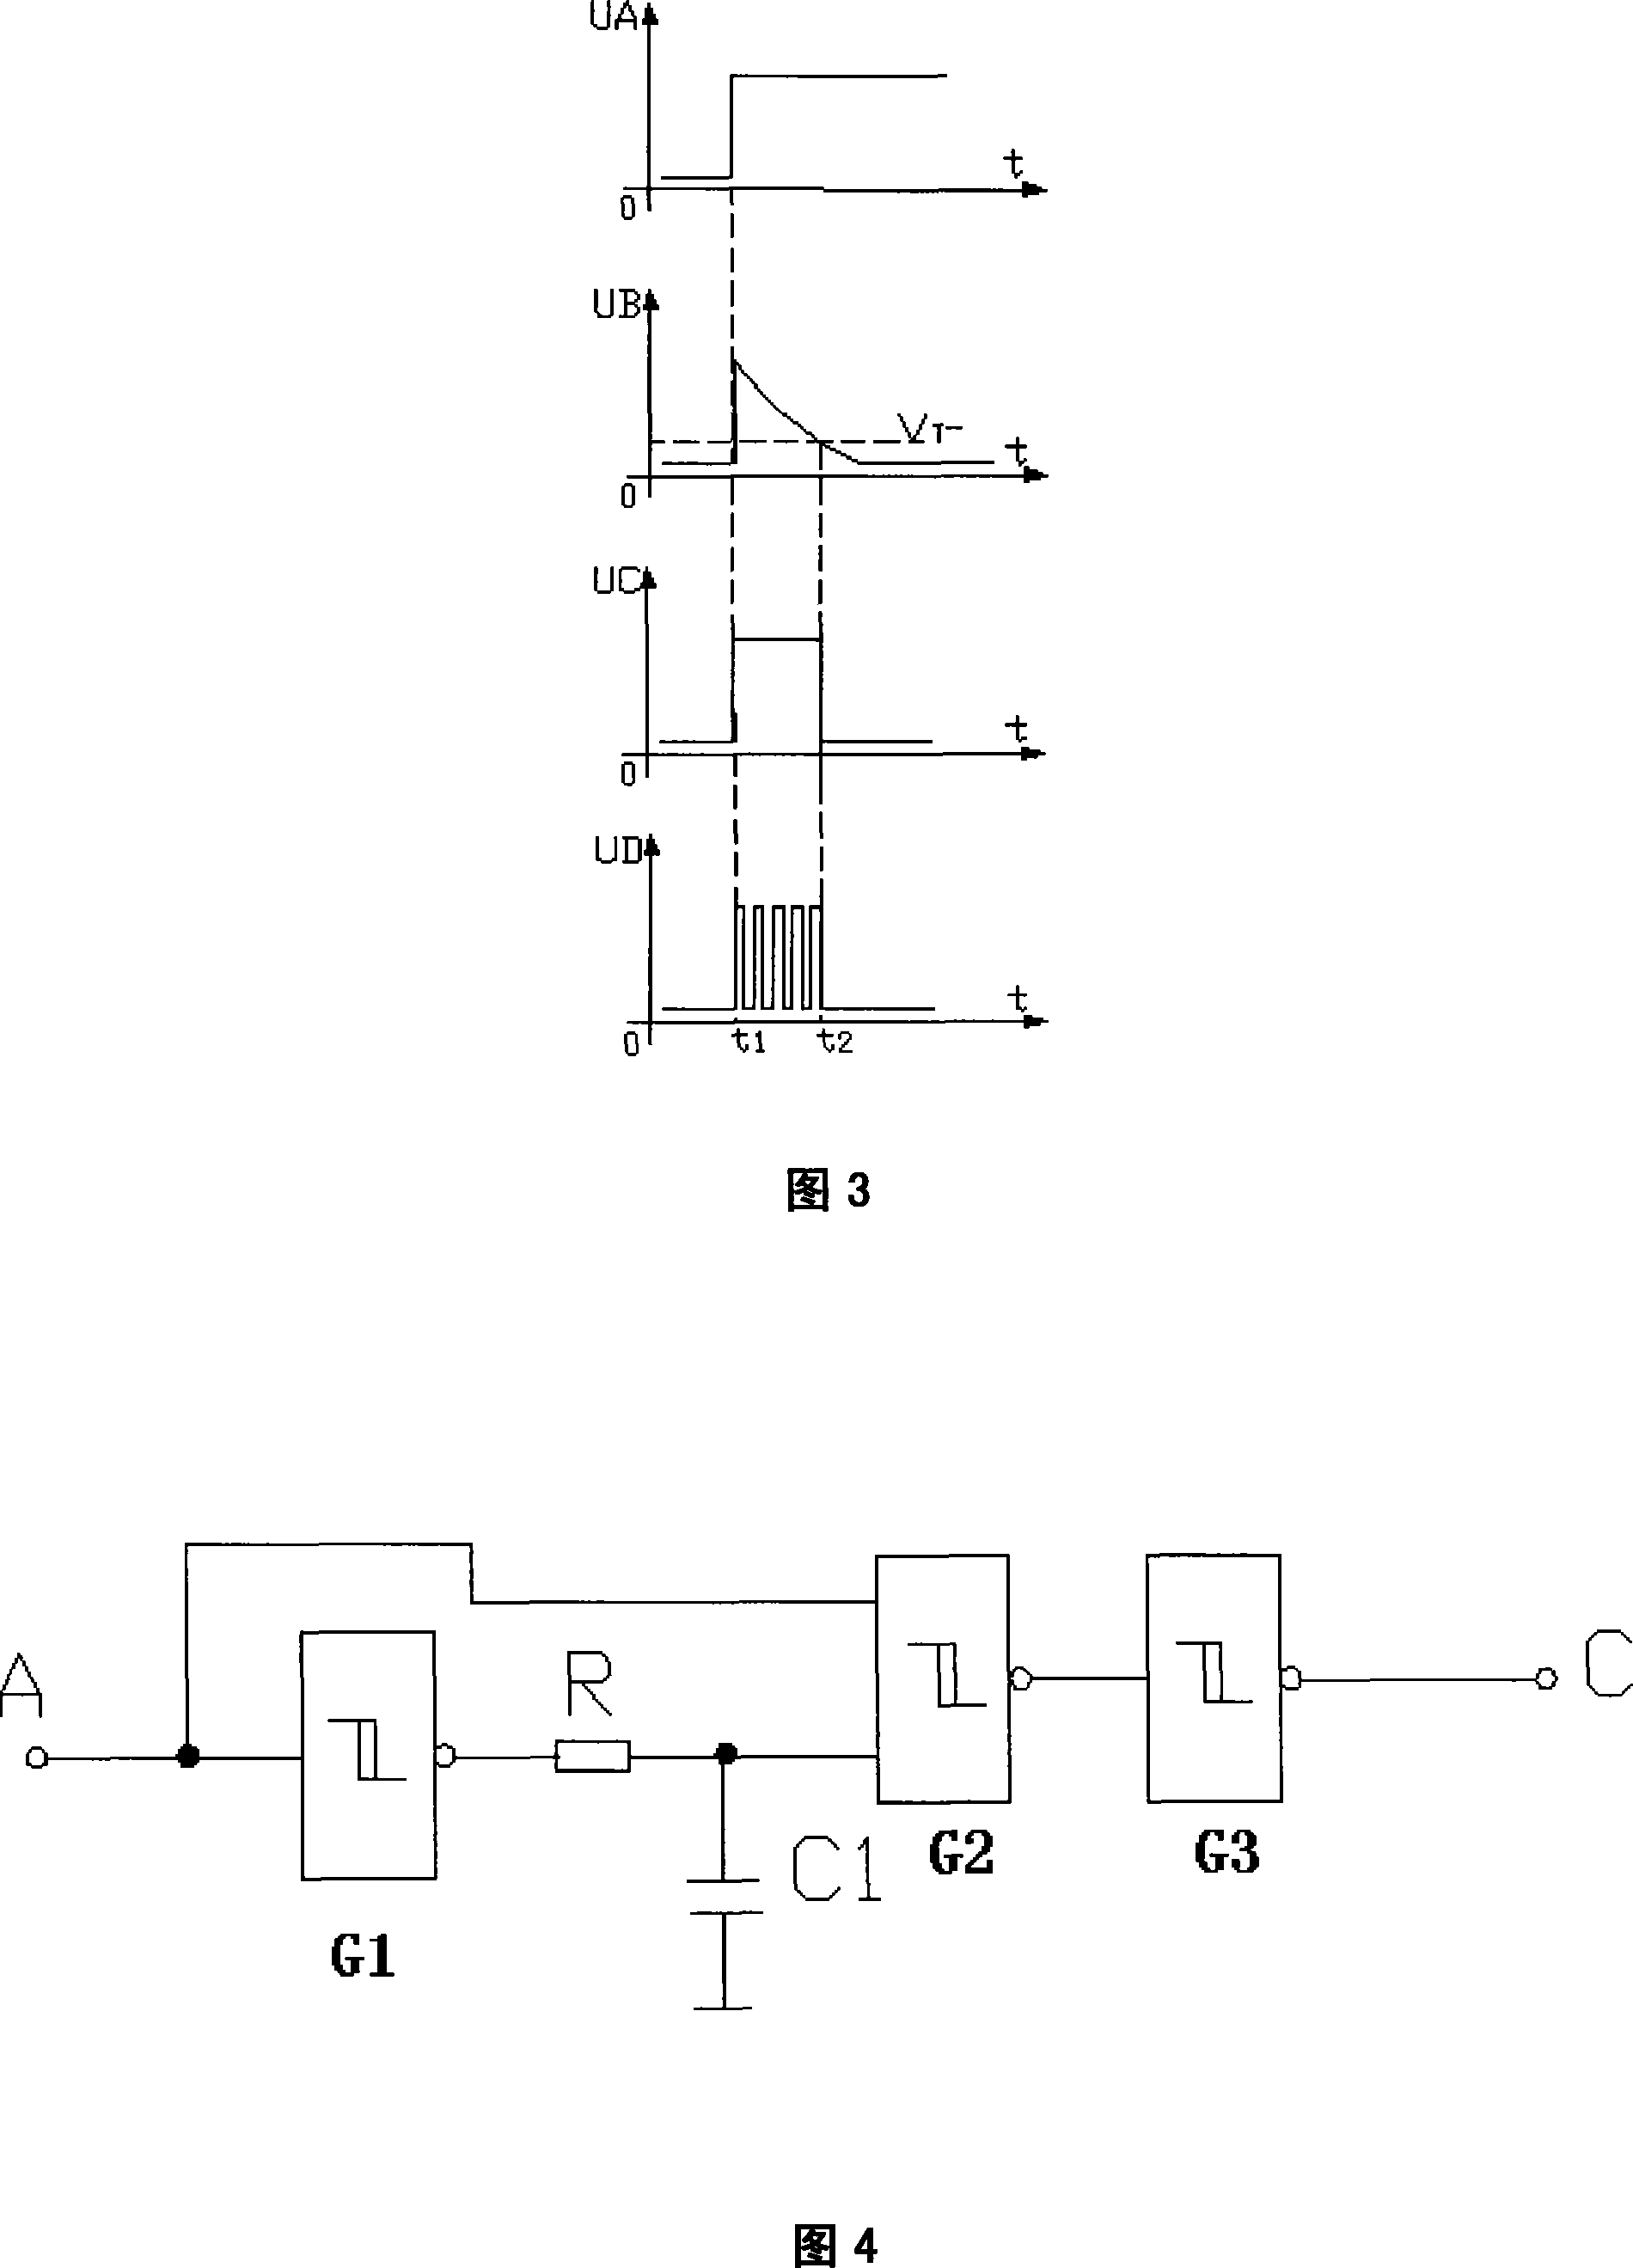 A controllable silicon compound switch with protection device